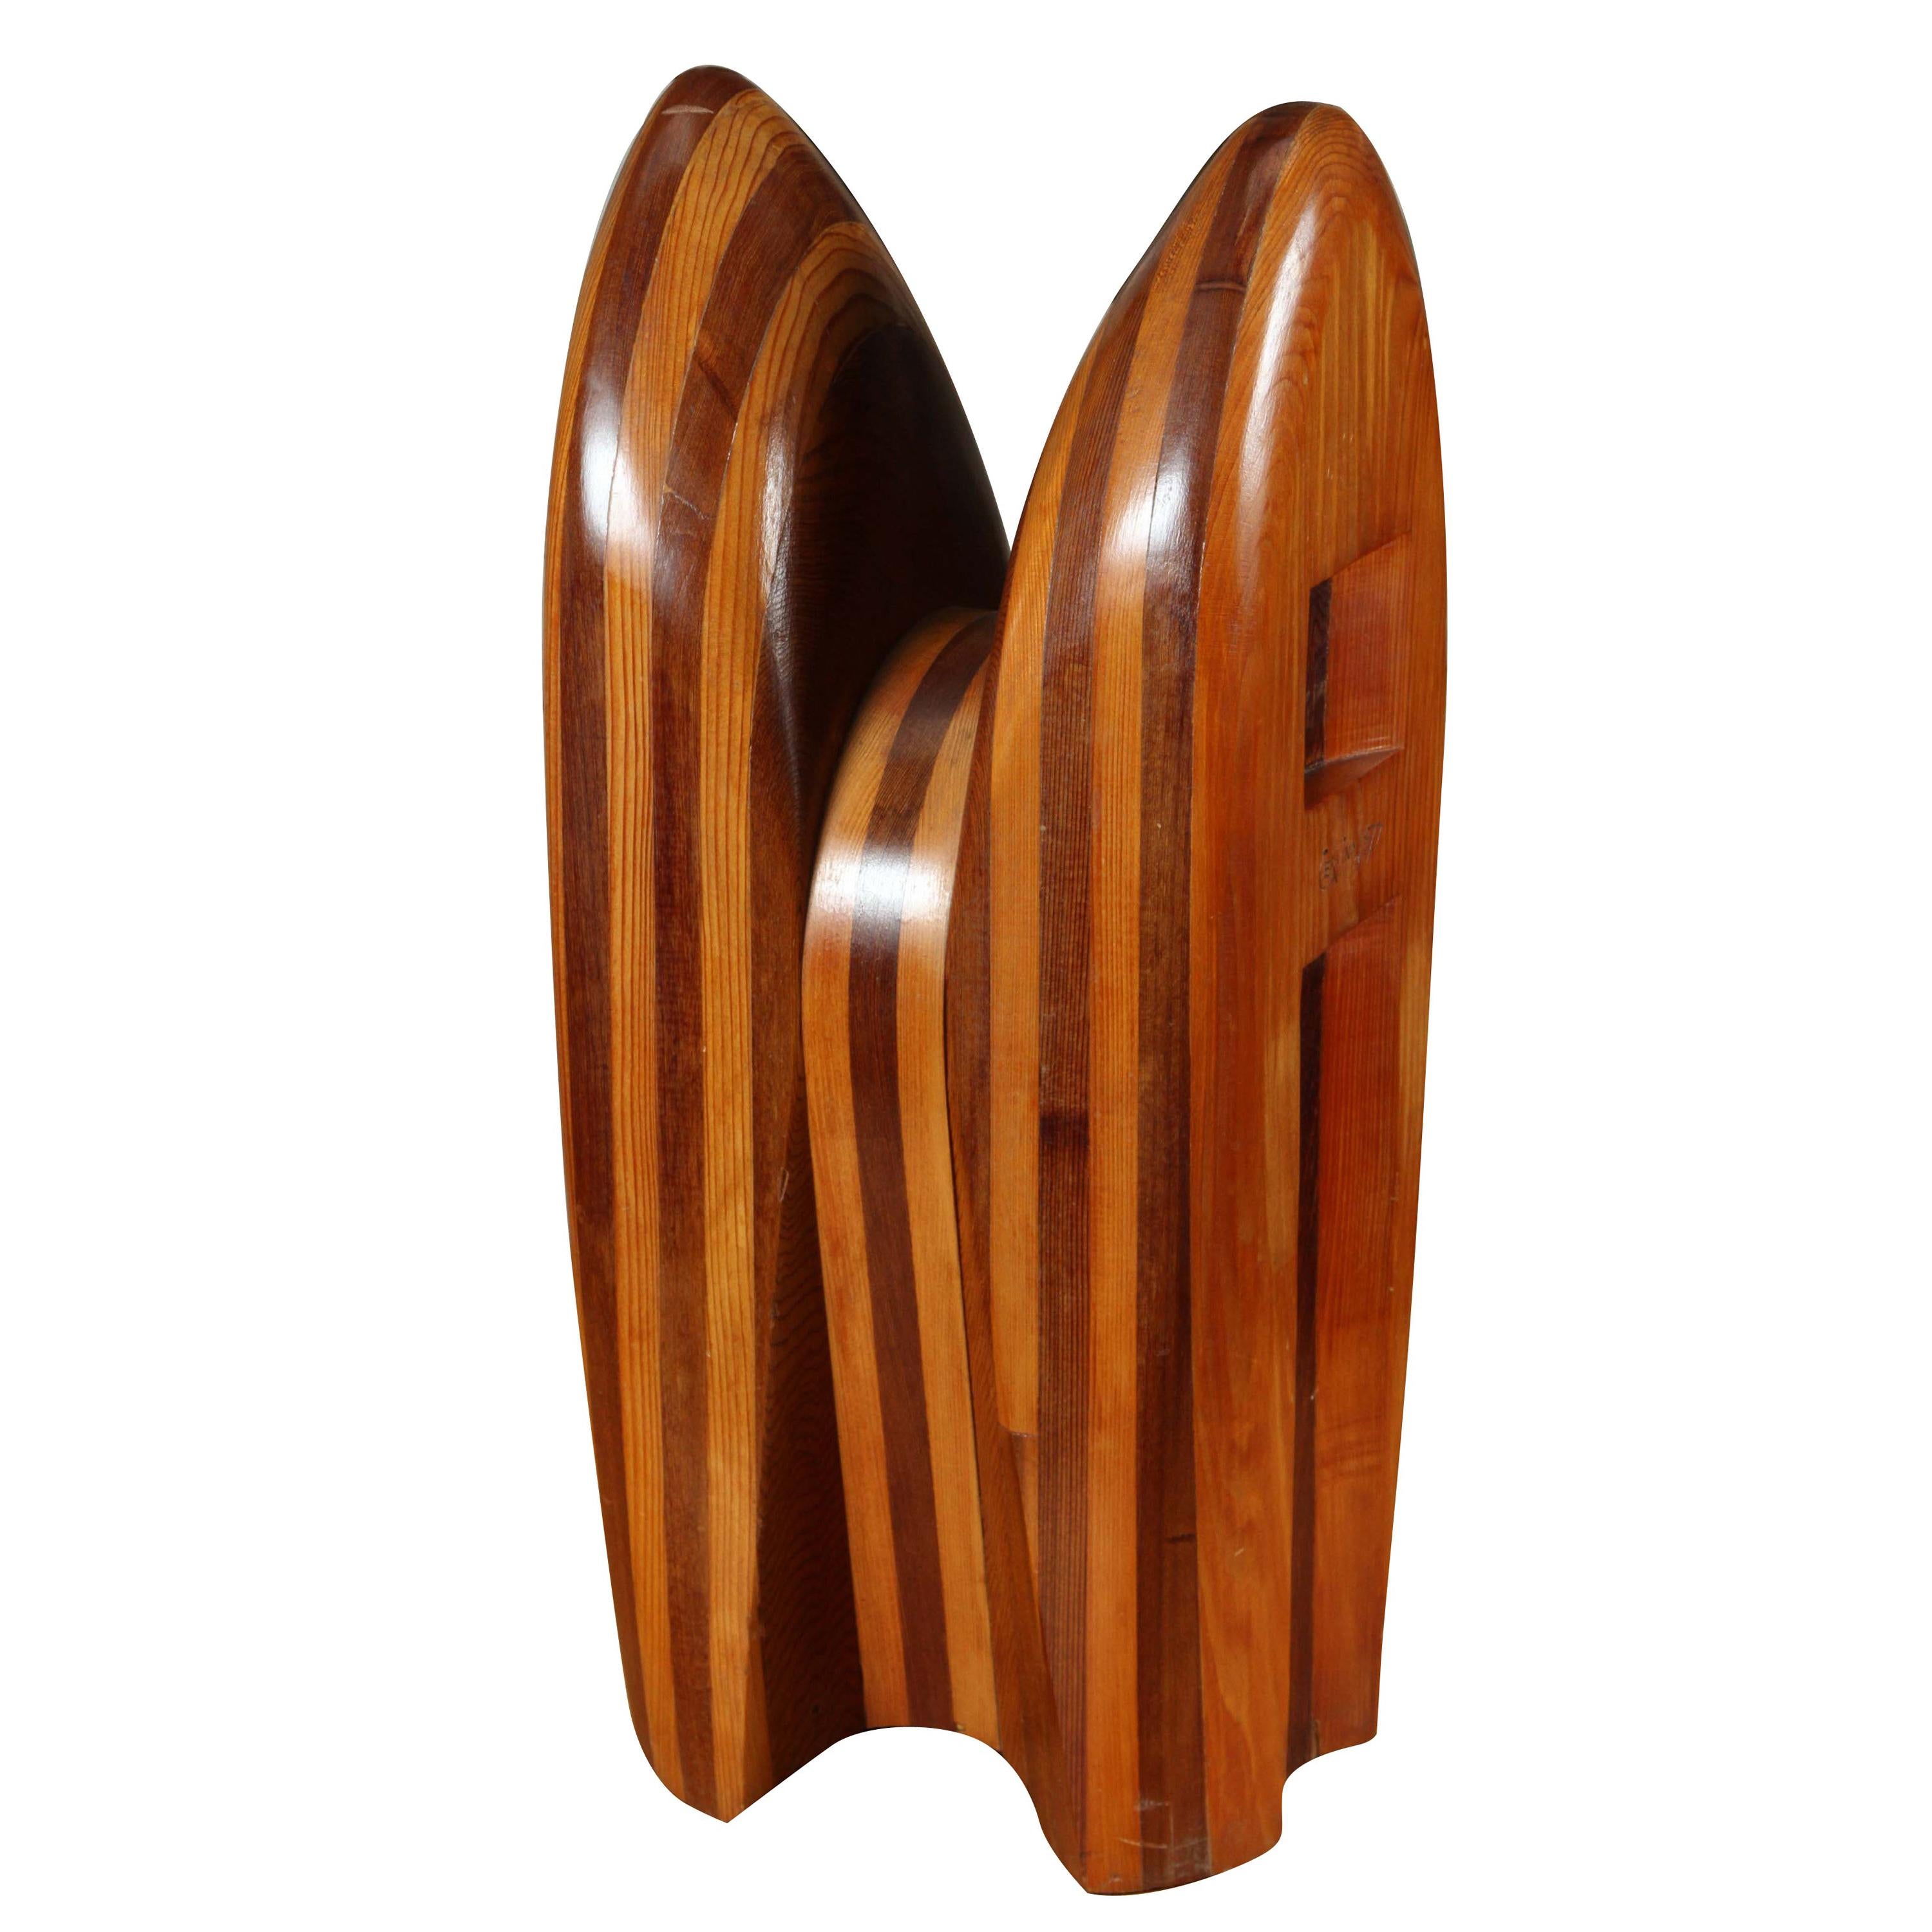 Abstract Wooden Sculpture by Cervino